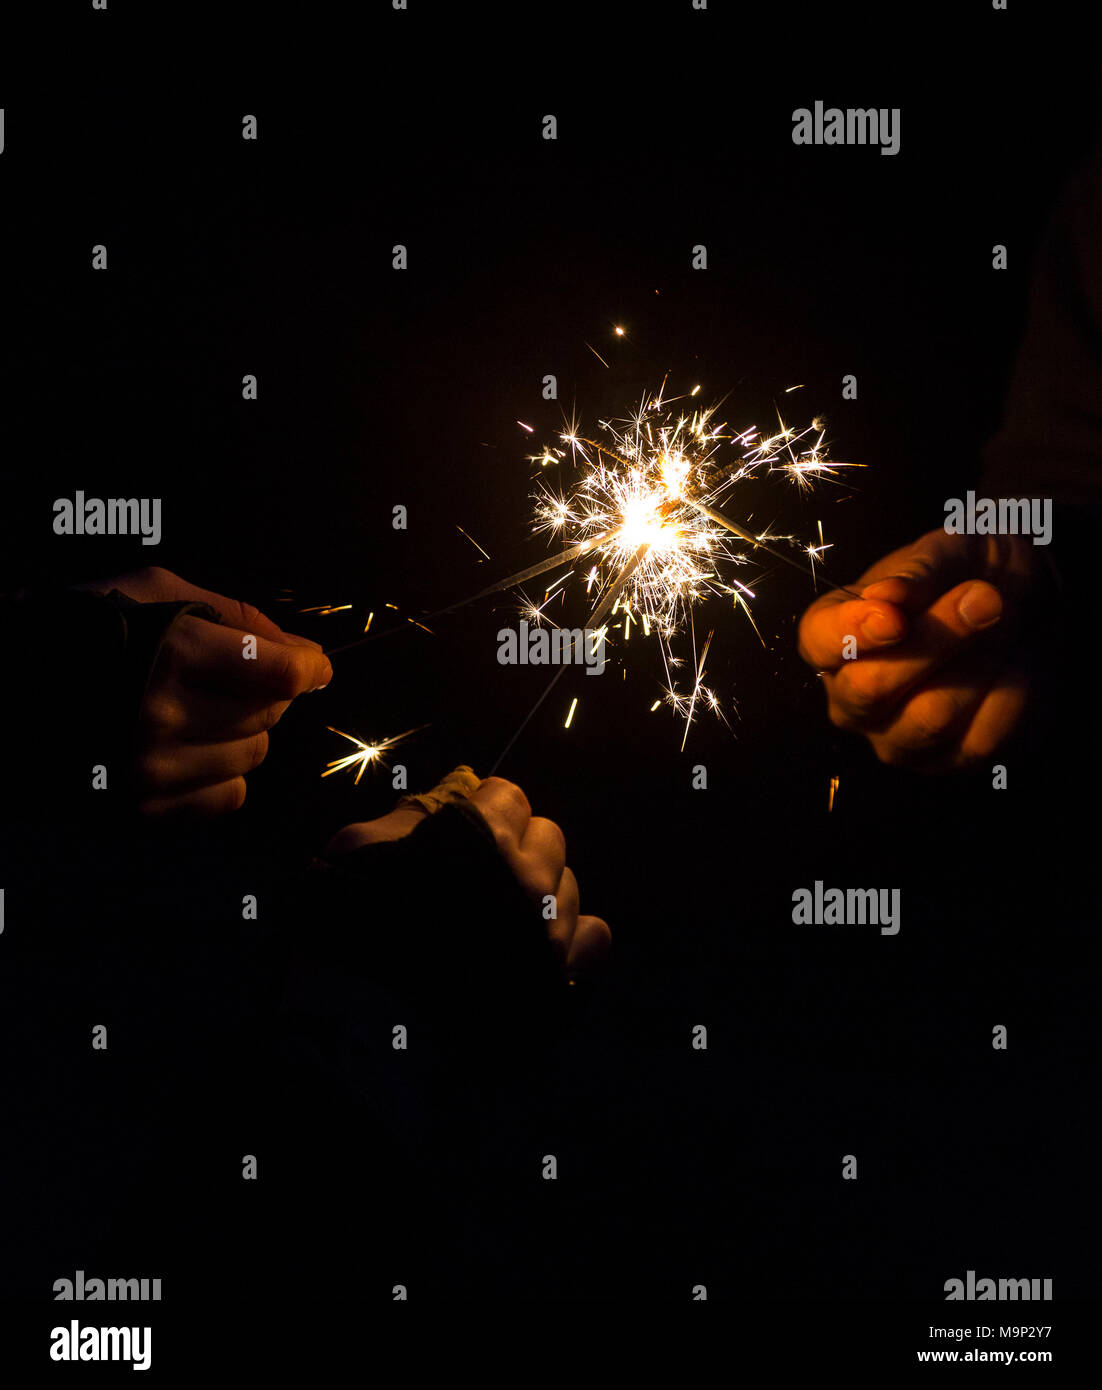 Burning sparklers in hands, symbil image party, fireworks, New Year's Eve Stock Photo